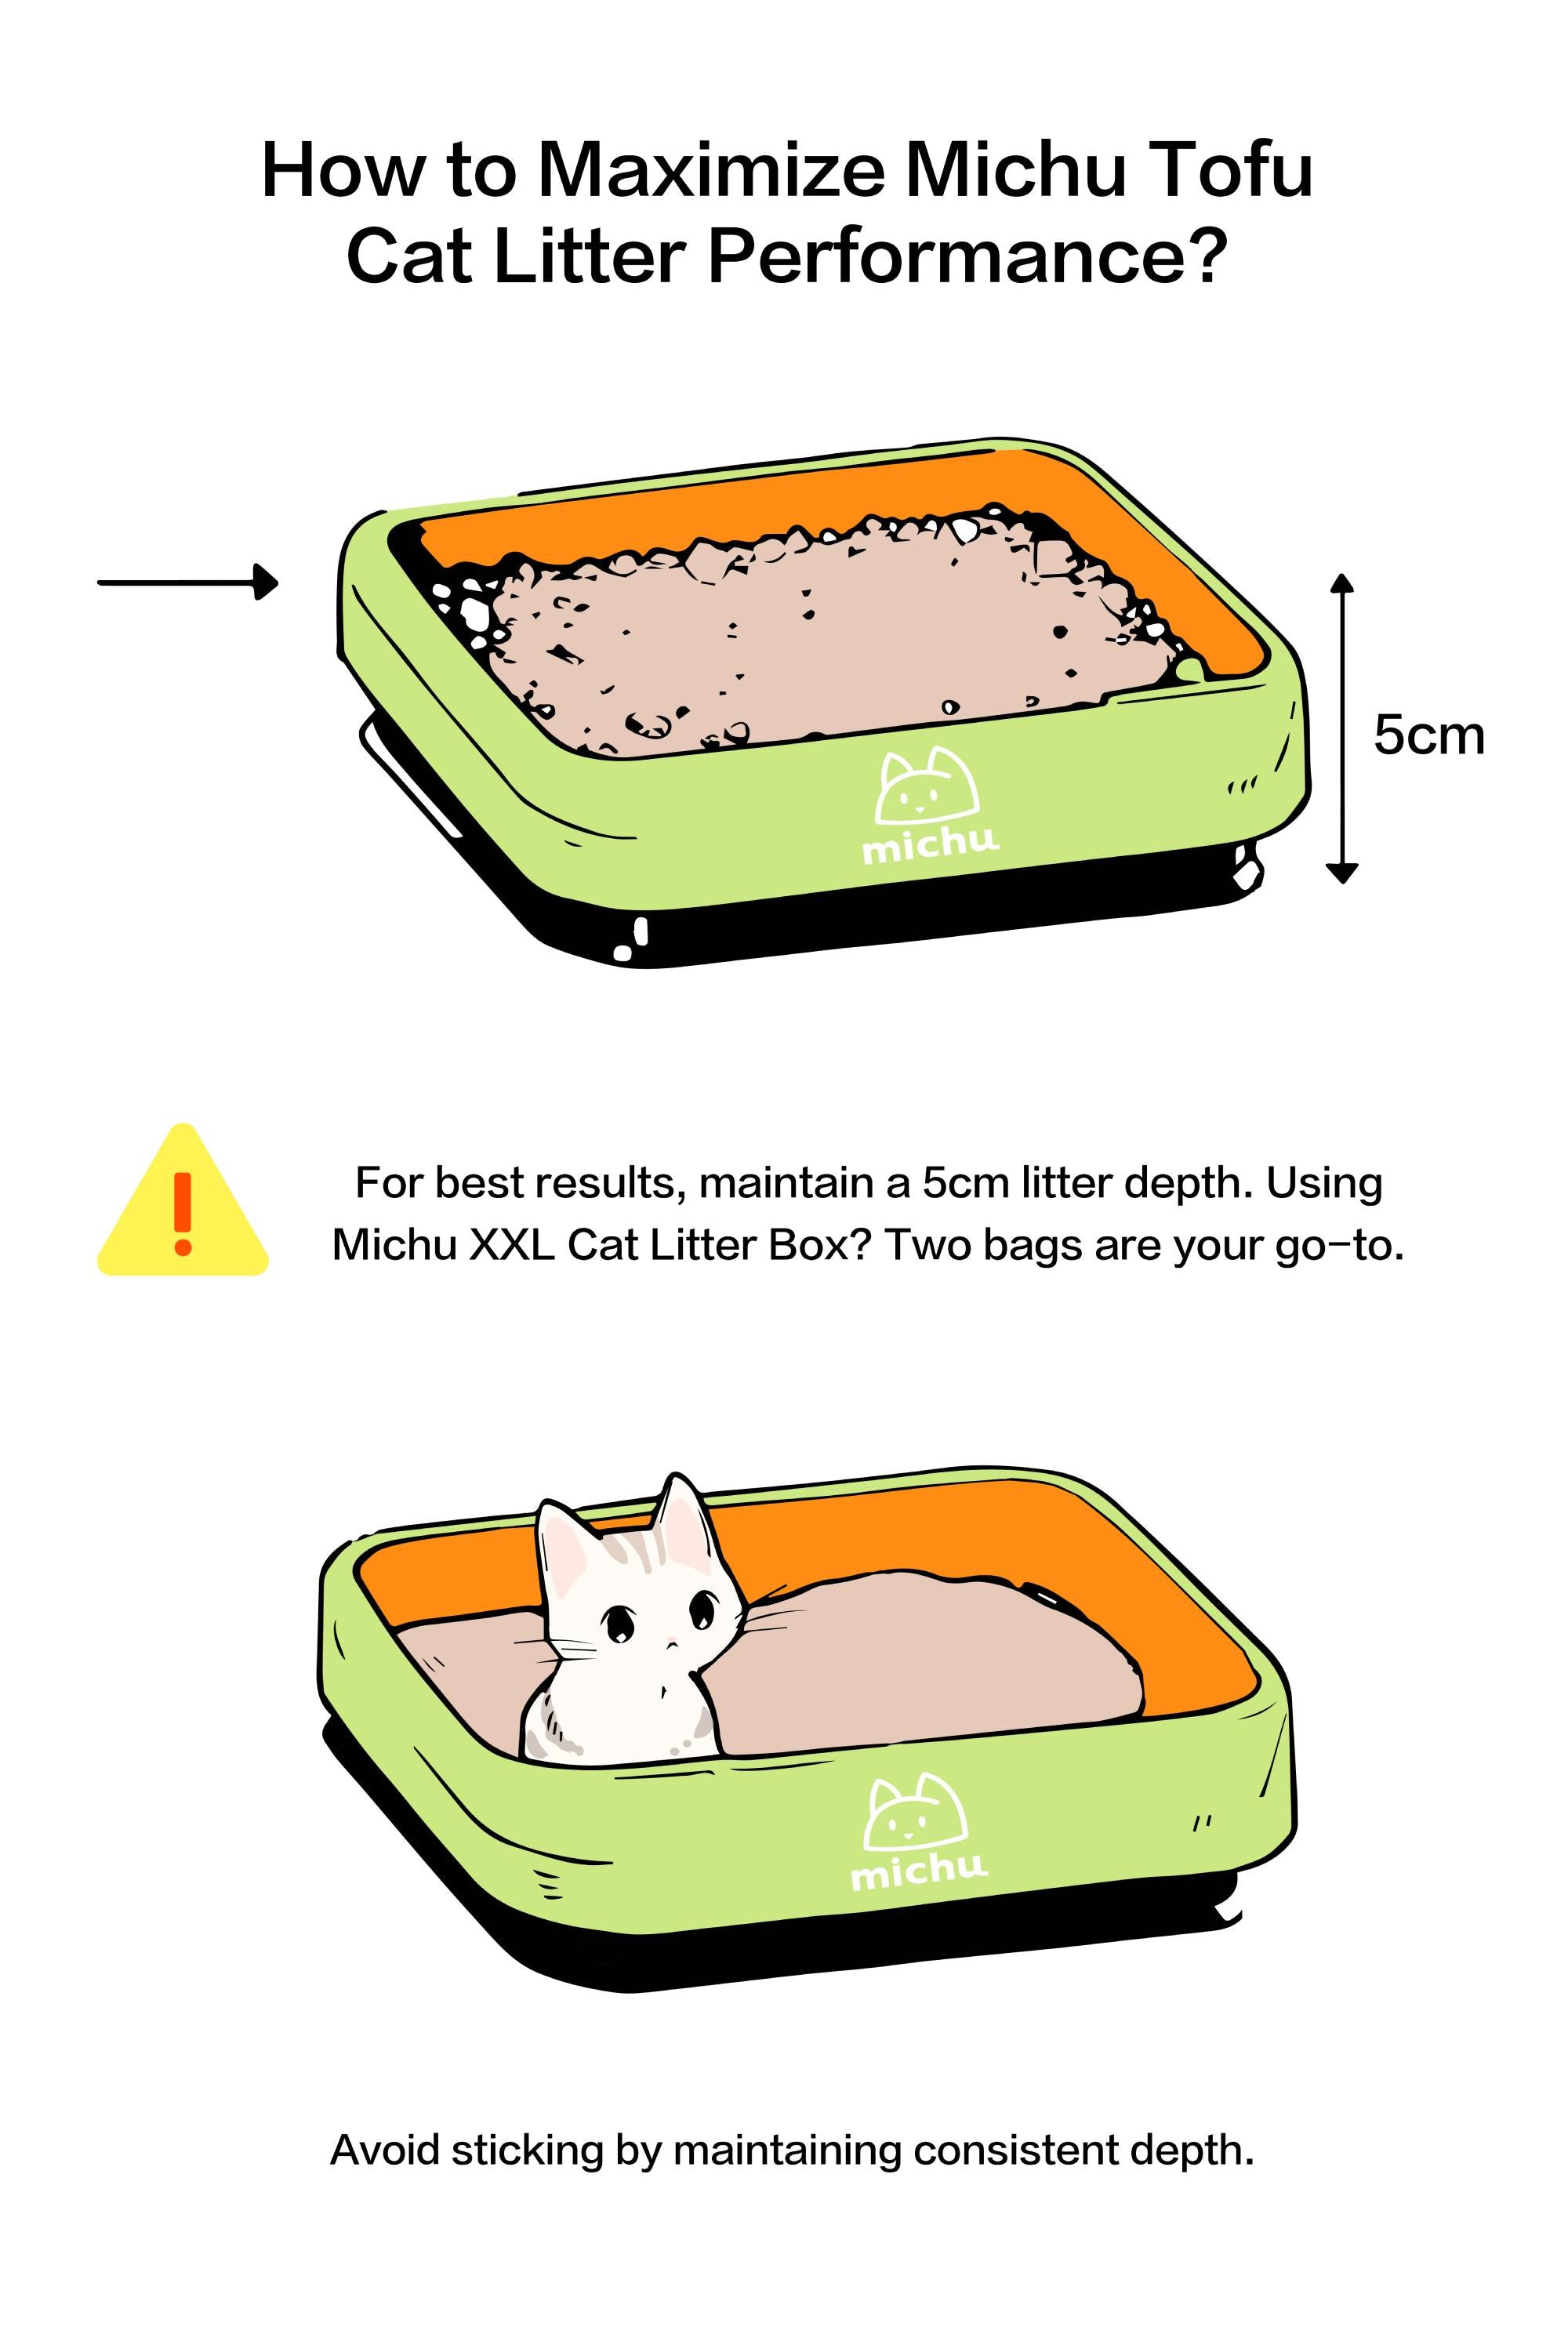 How to Maximize Tofu Cat Litter Performance